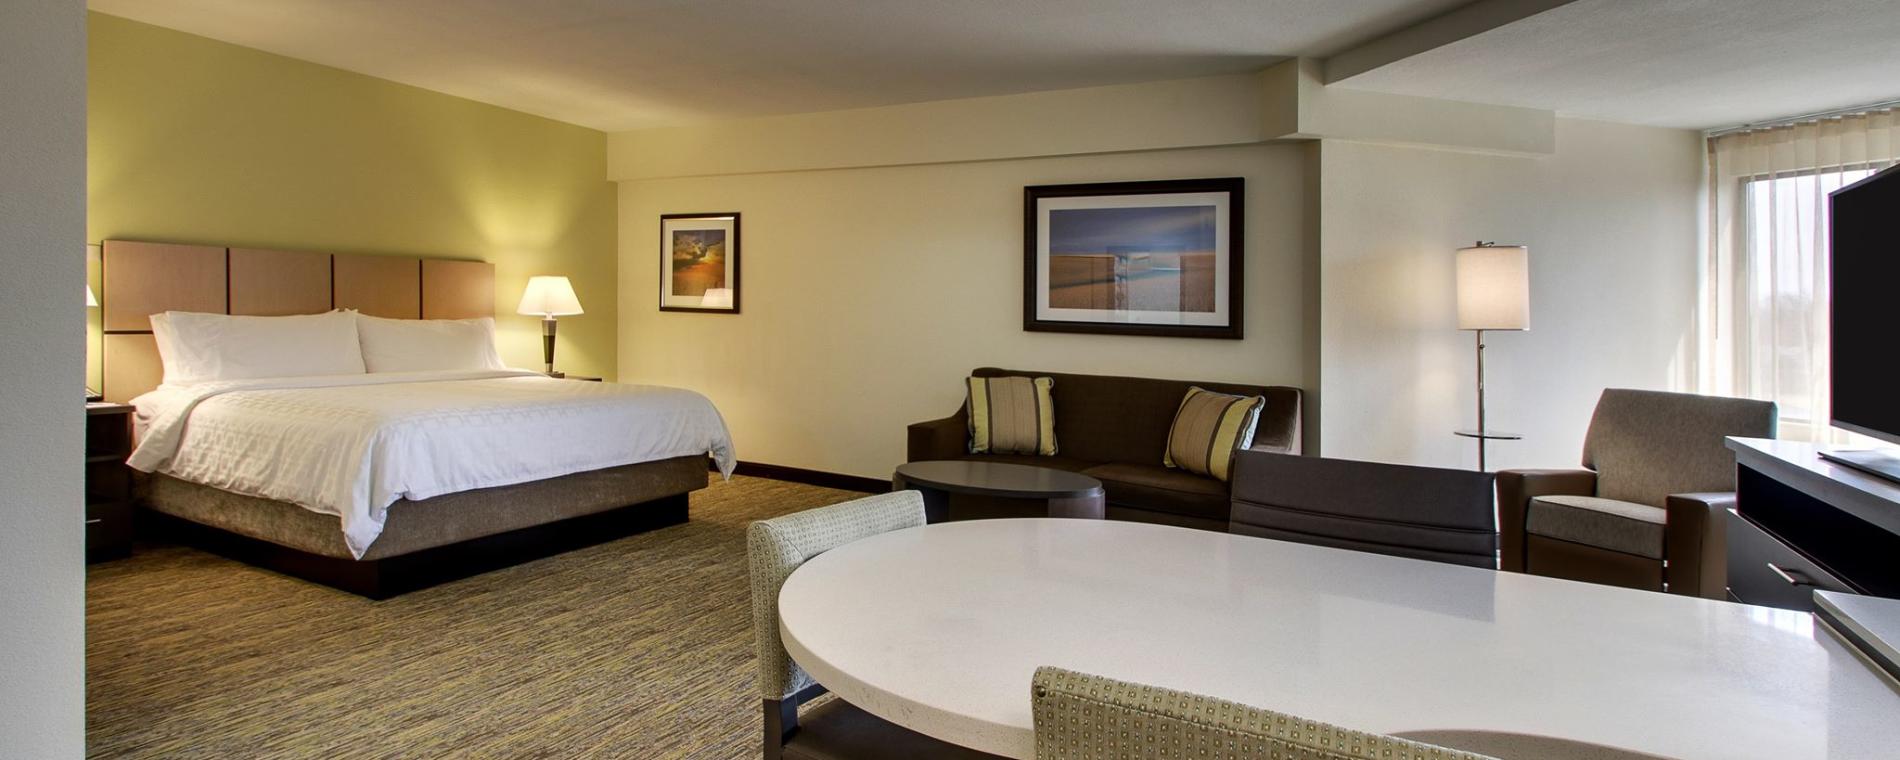 Candlewood Suites Clarksville, Clarksville | HotelsCombined